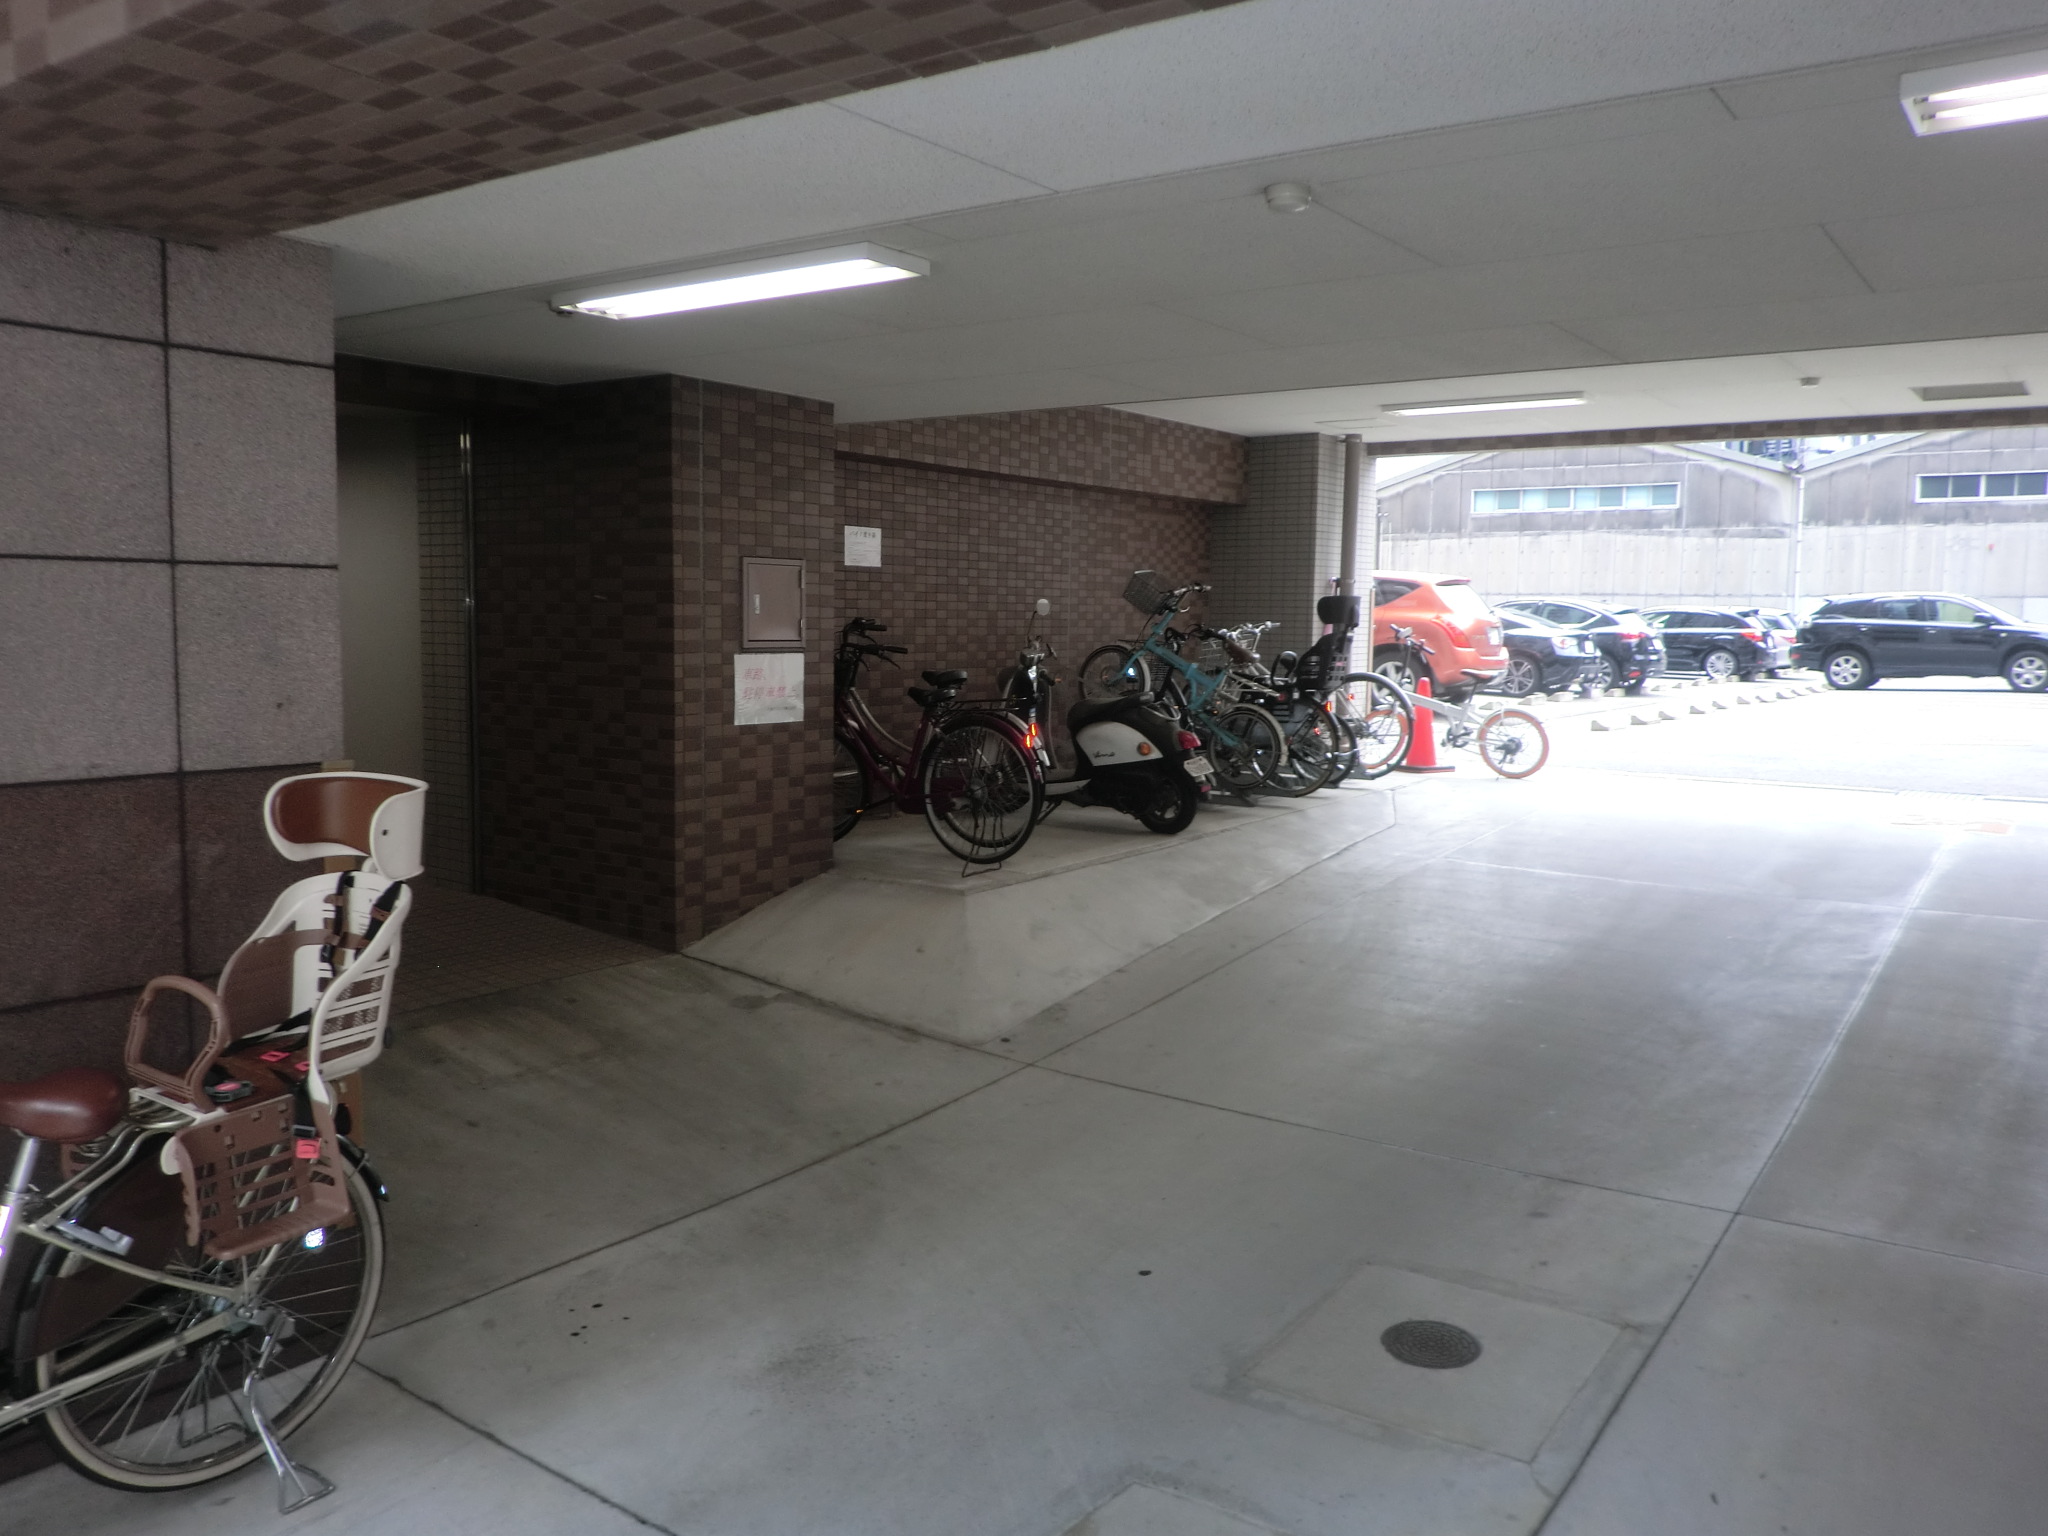 Other common areas. Spacious parking